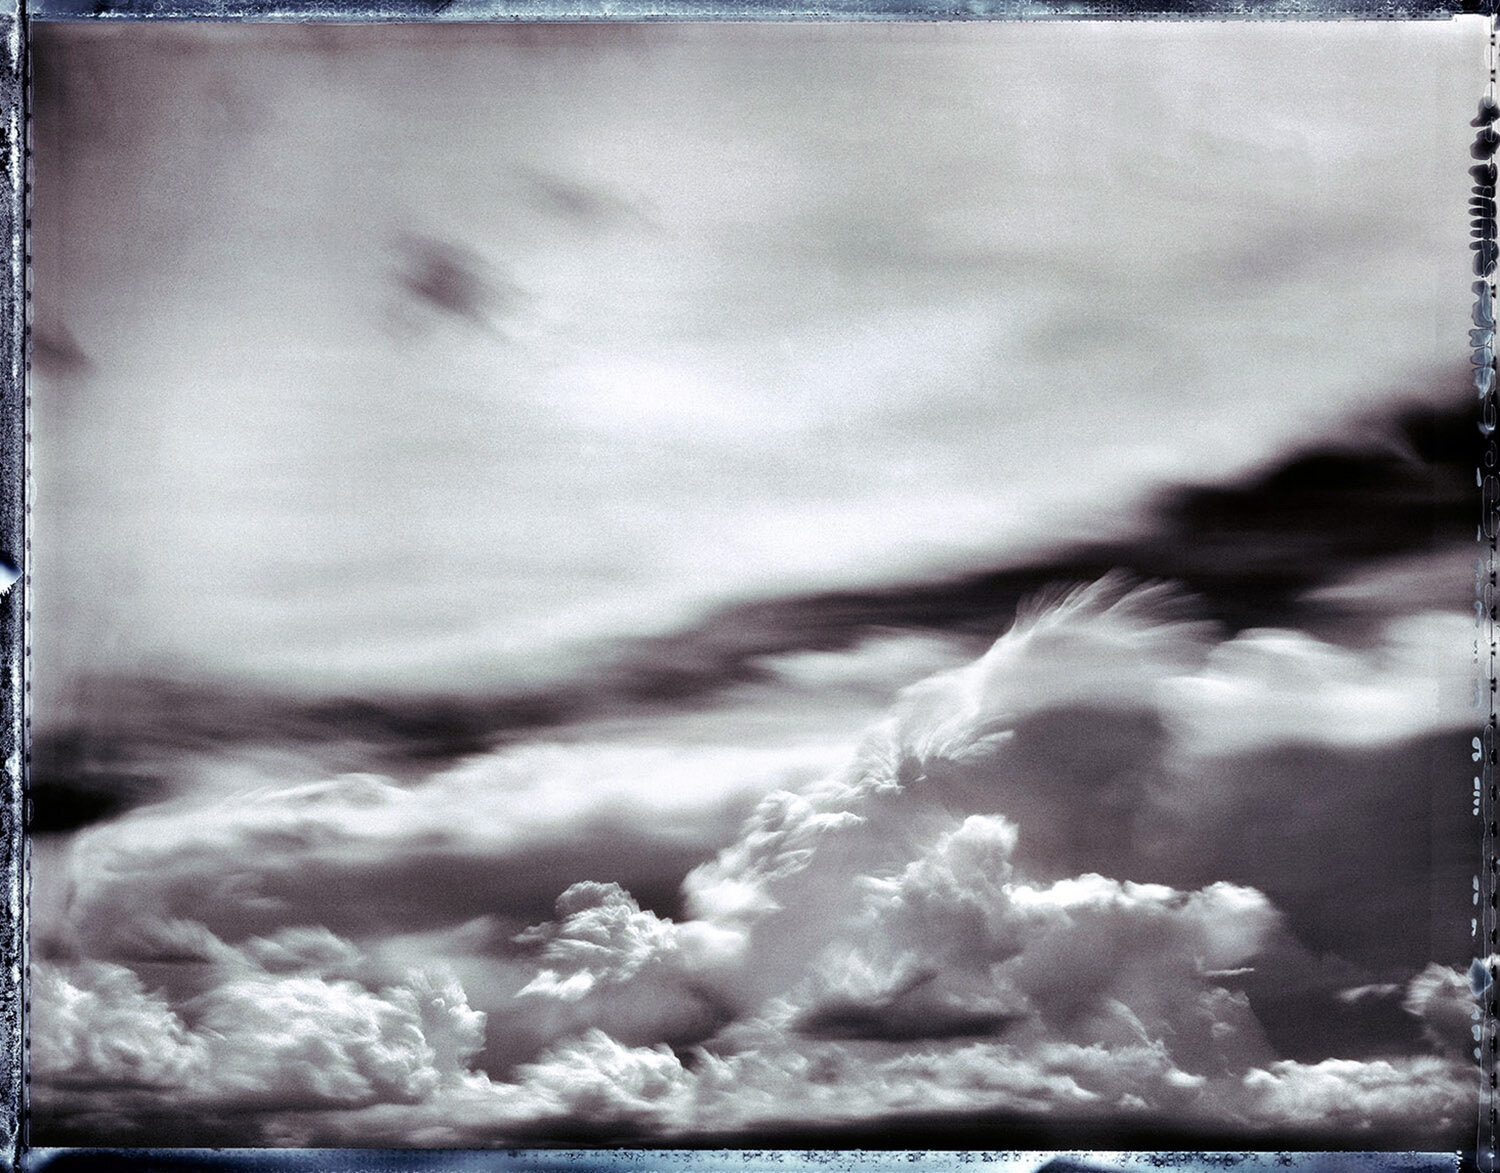 Stormclouds Forming, #10